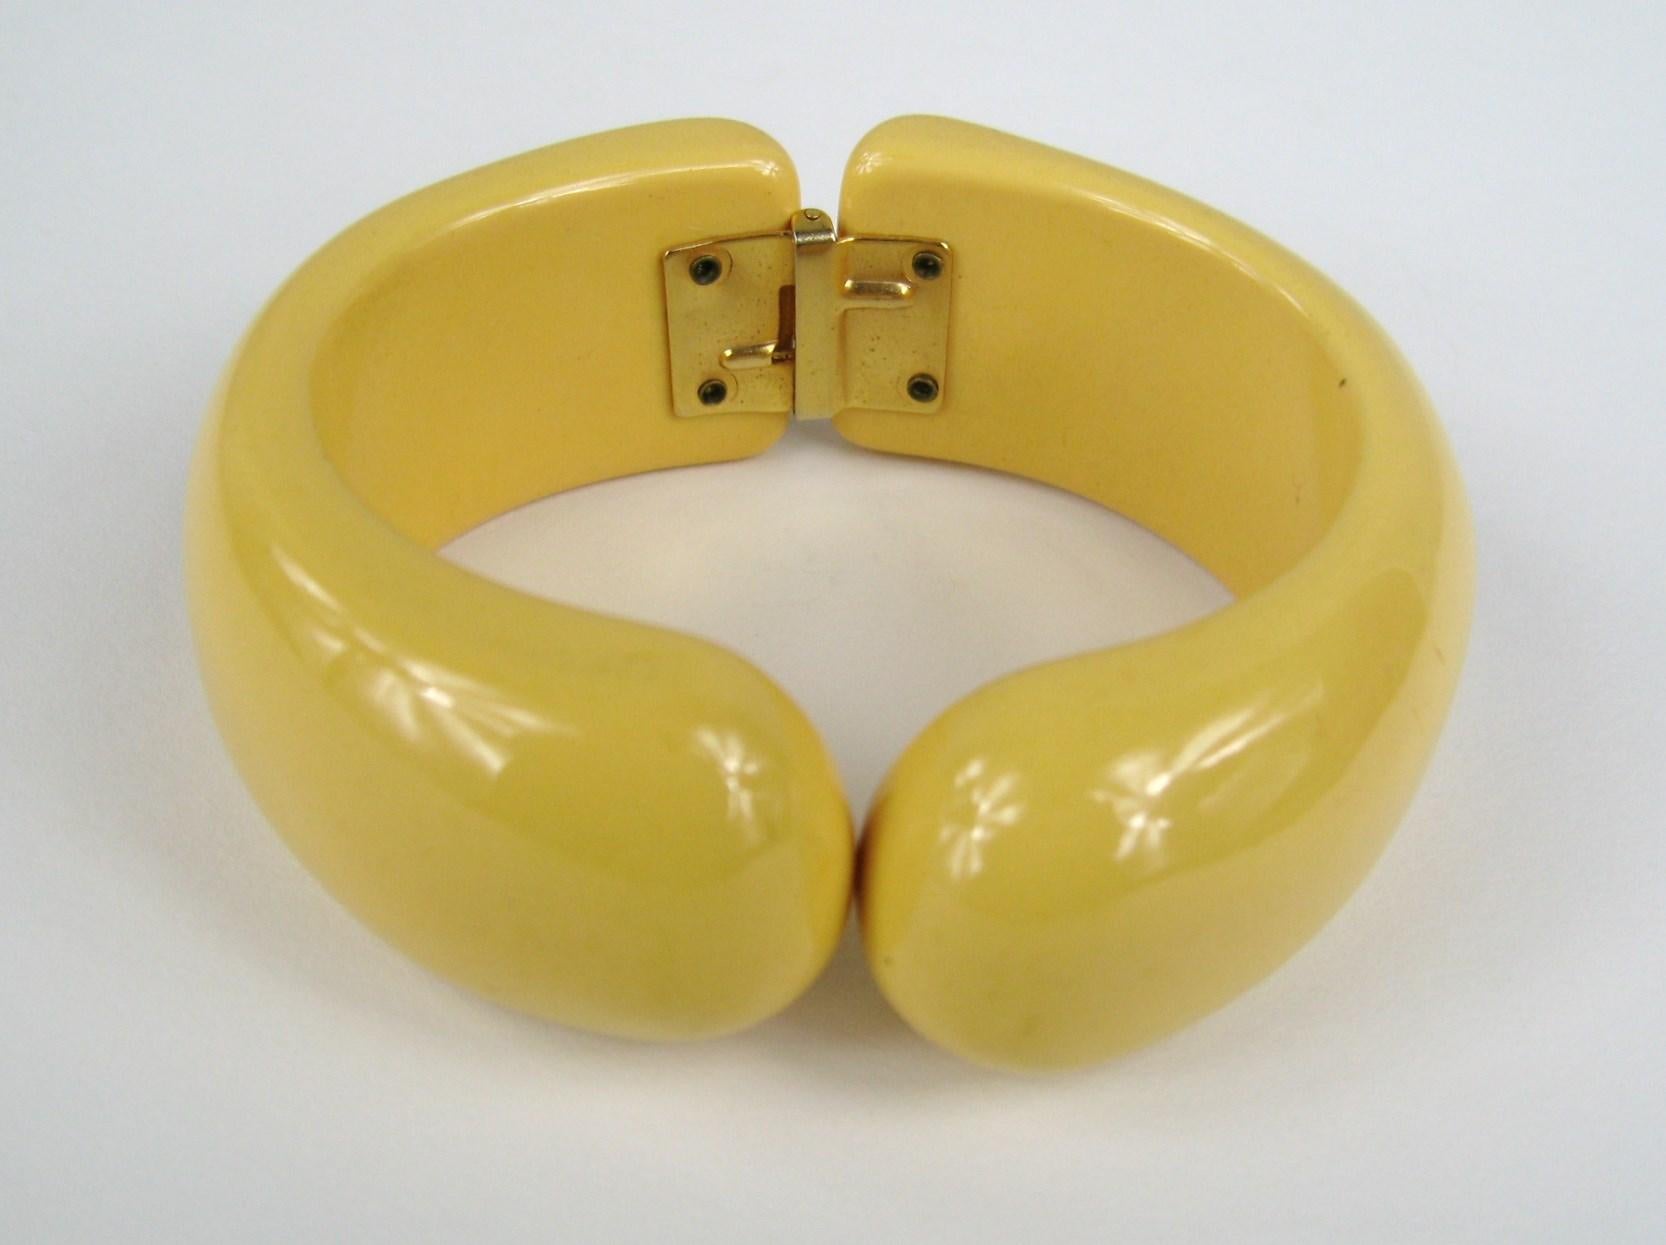 Original 1930s Ivory colored Bakelite Clamper Bracelet  In Excellent Condition For Sale In Wallkill, NY